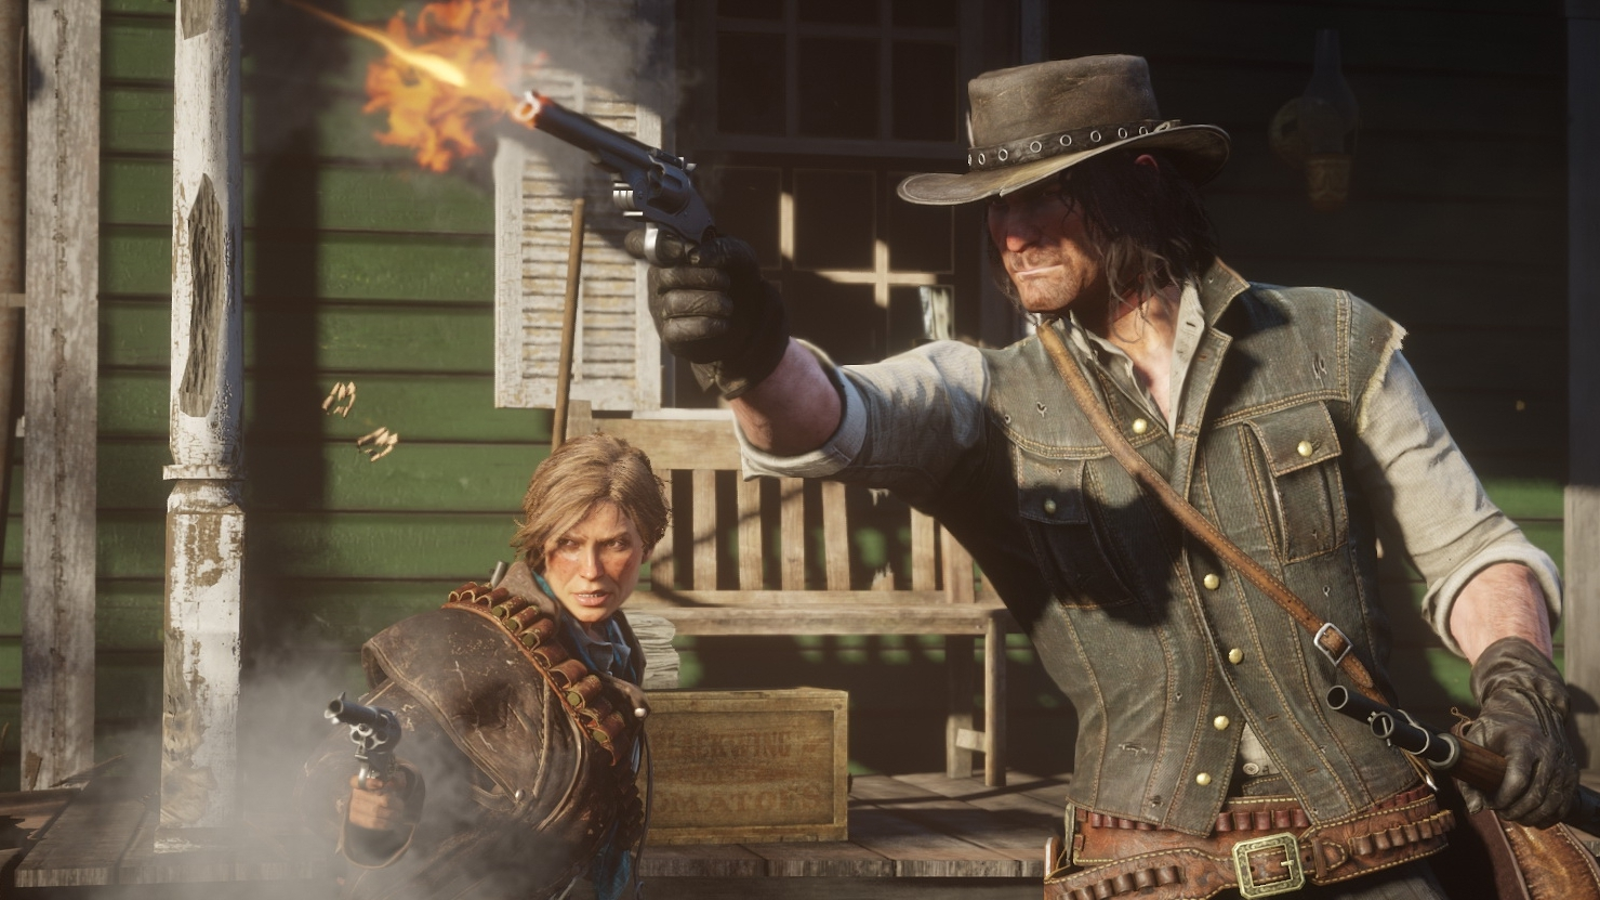 Buy Red Dead Redemption 2 US Xbox One Xbox Key 